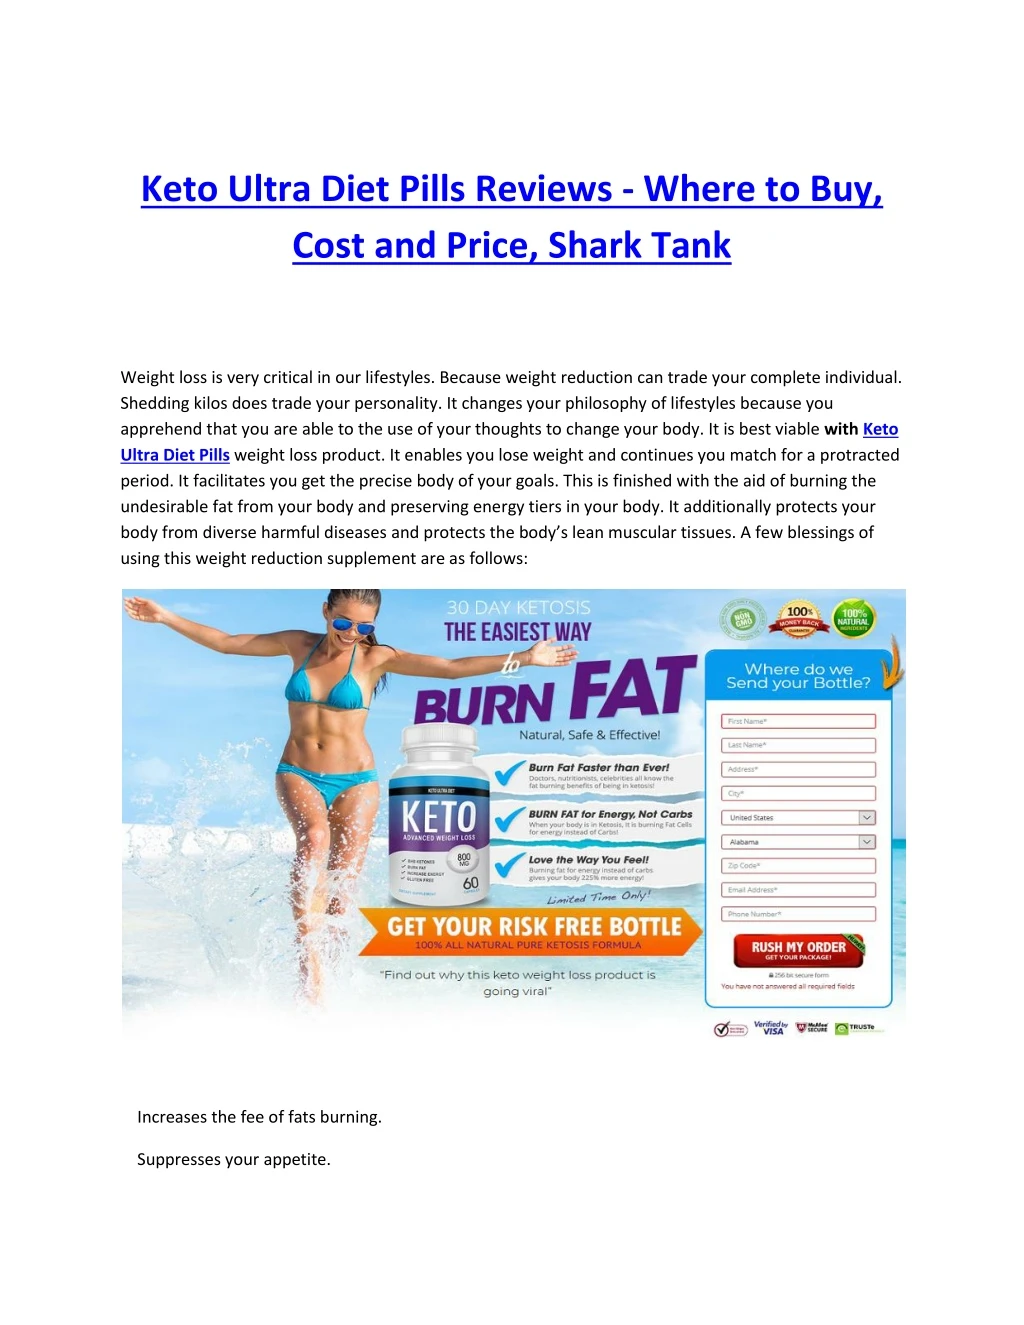 keto ultra diet pills reviews where to buy cost